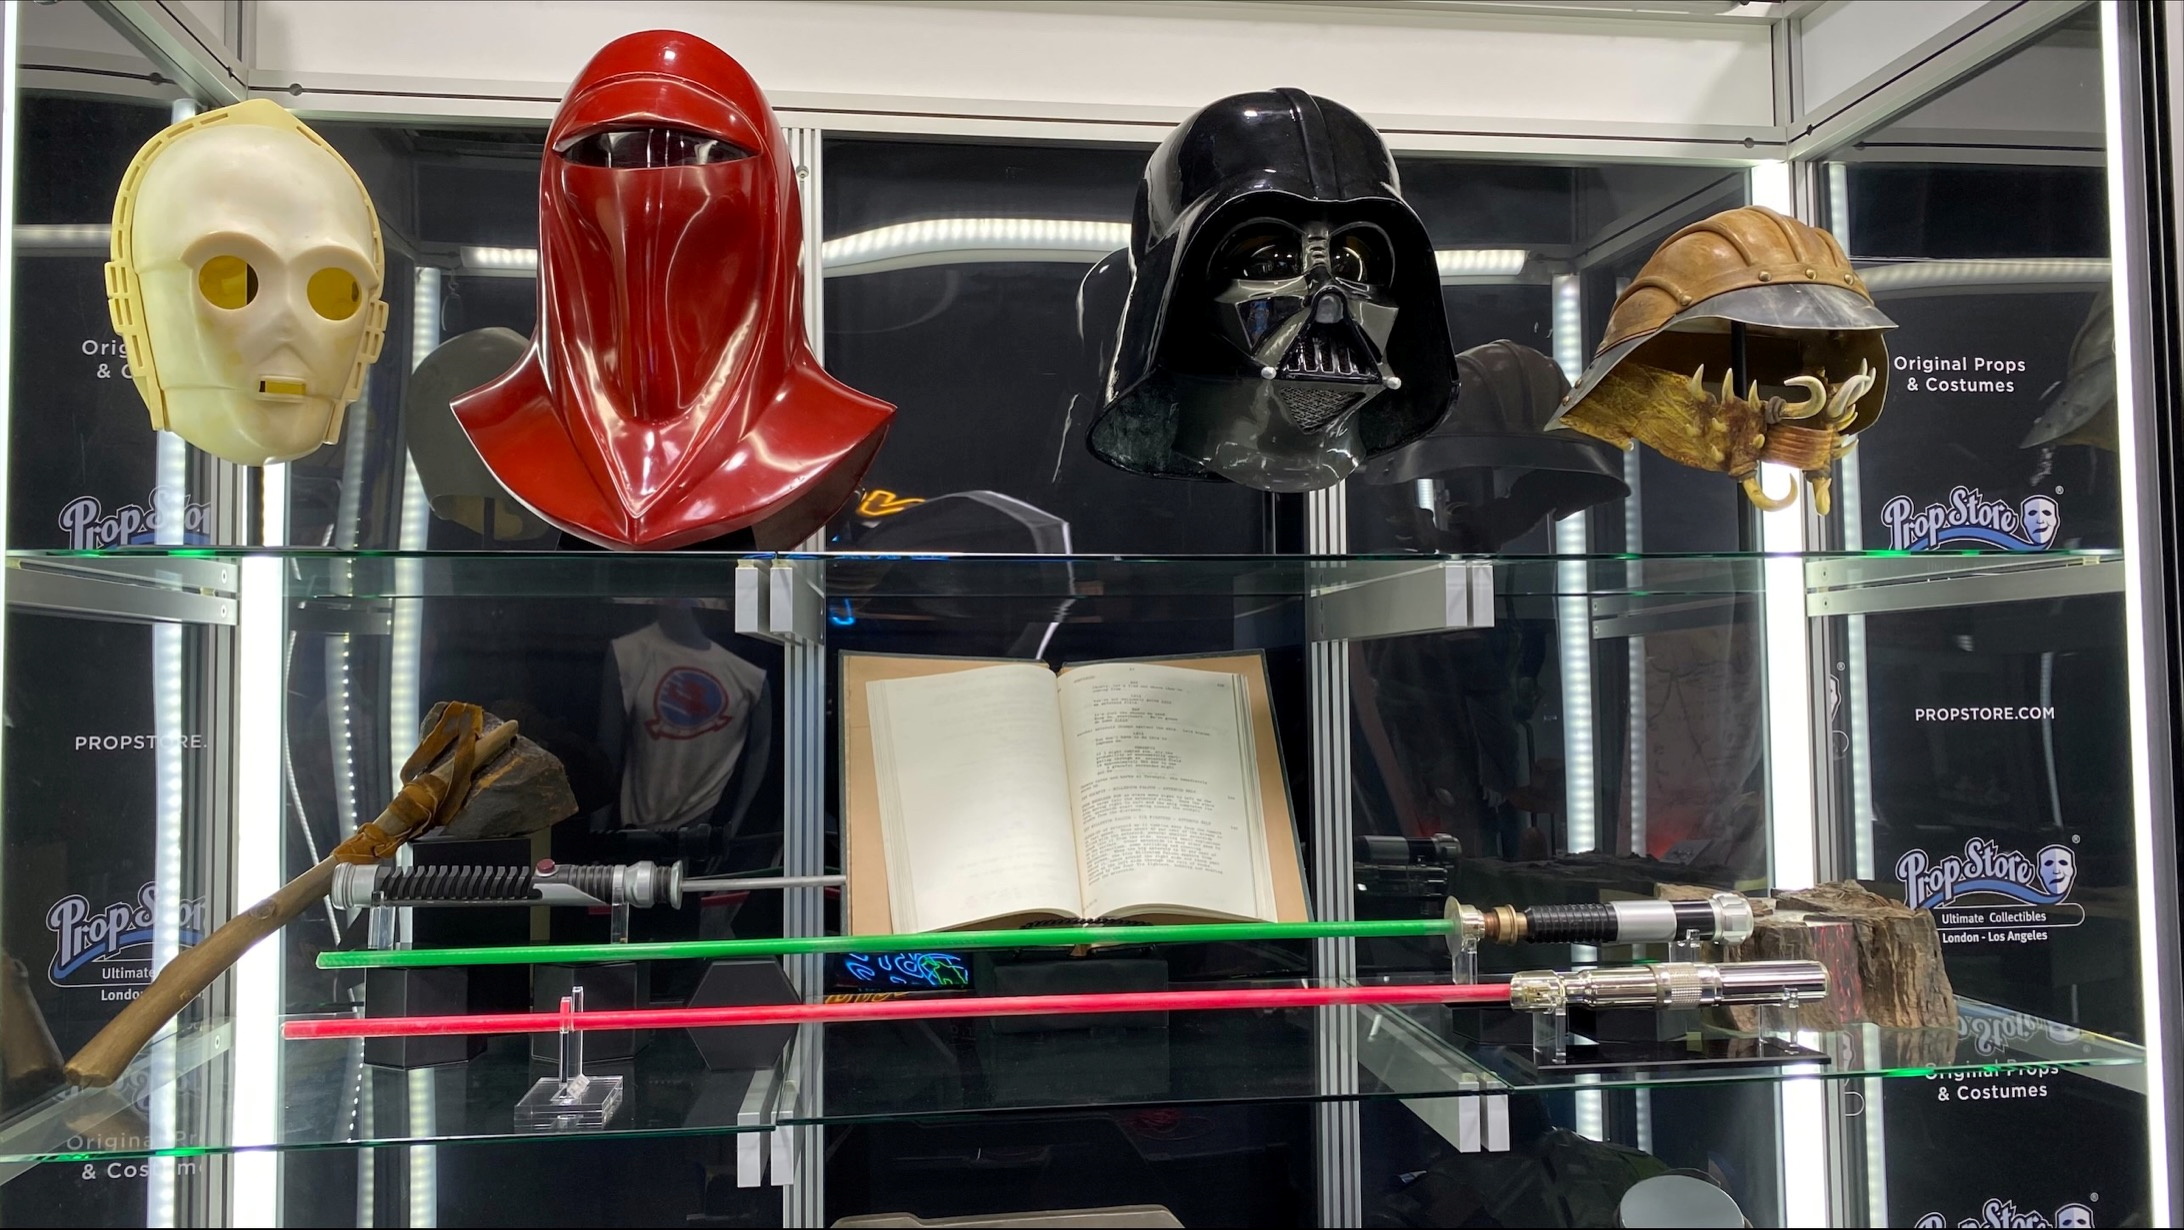 Props from the Star Wars movie franchise, set to be auctioned in June, are displayed at Prop Store, in Santa Clarita, California, U.S., May 21, 2021. REUTERS/Norma Galeana